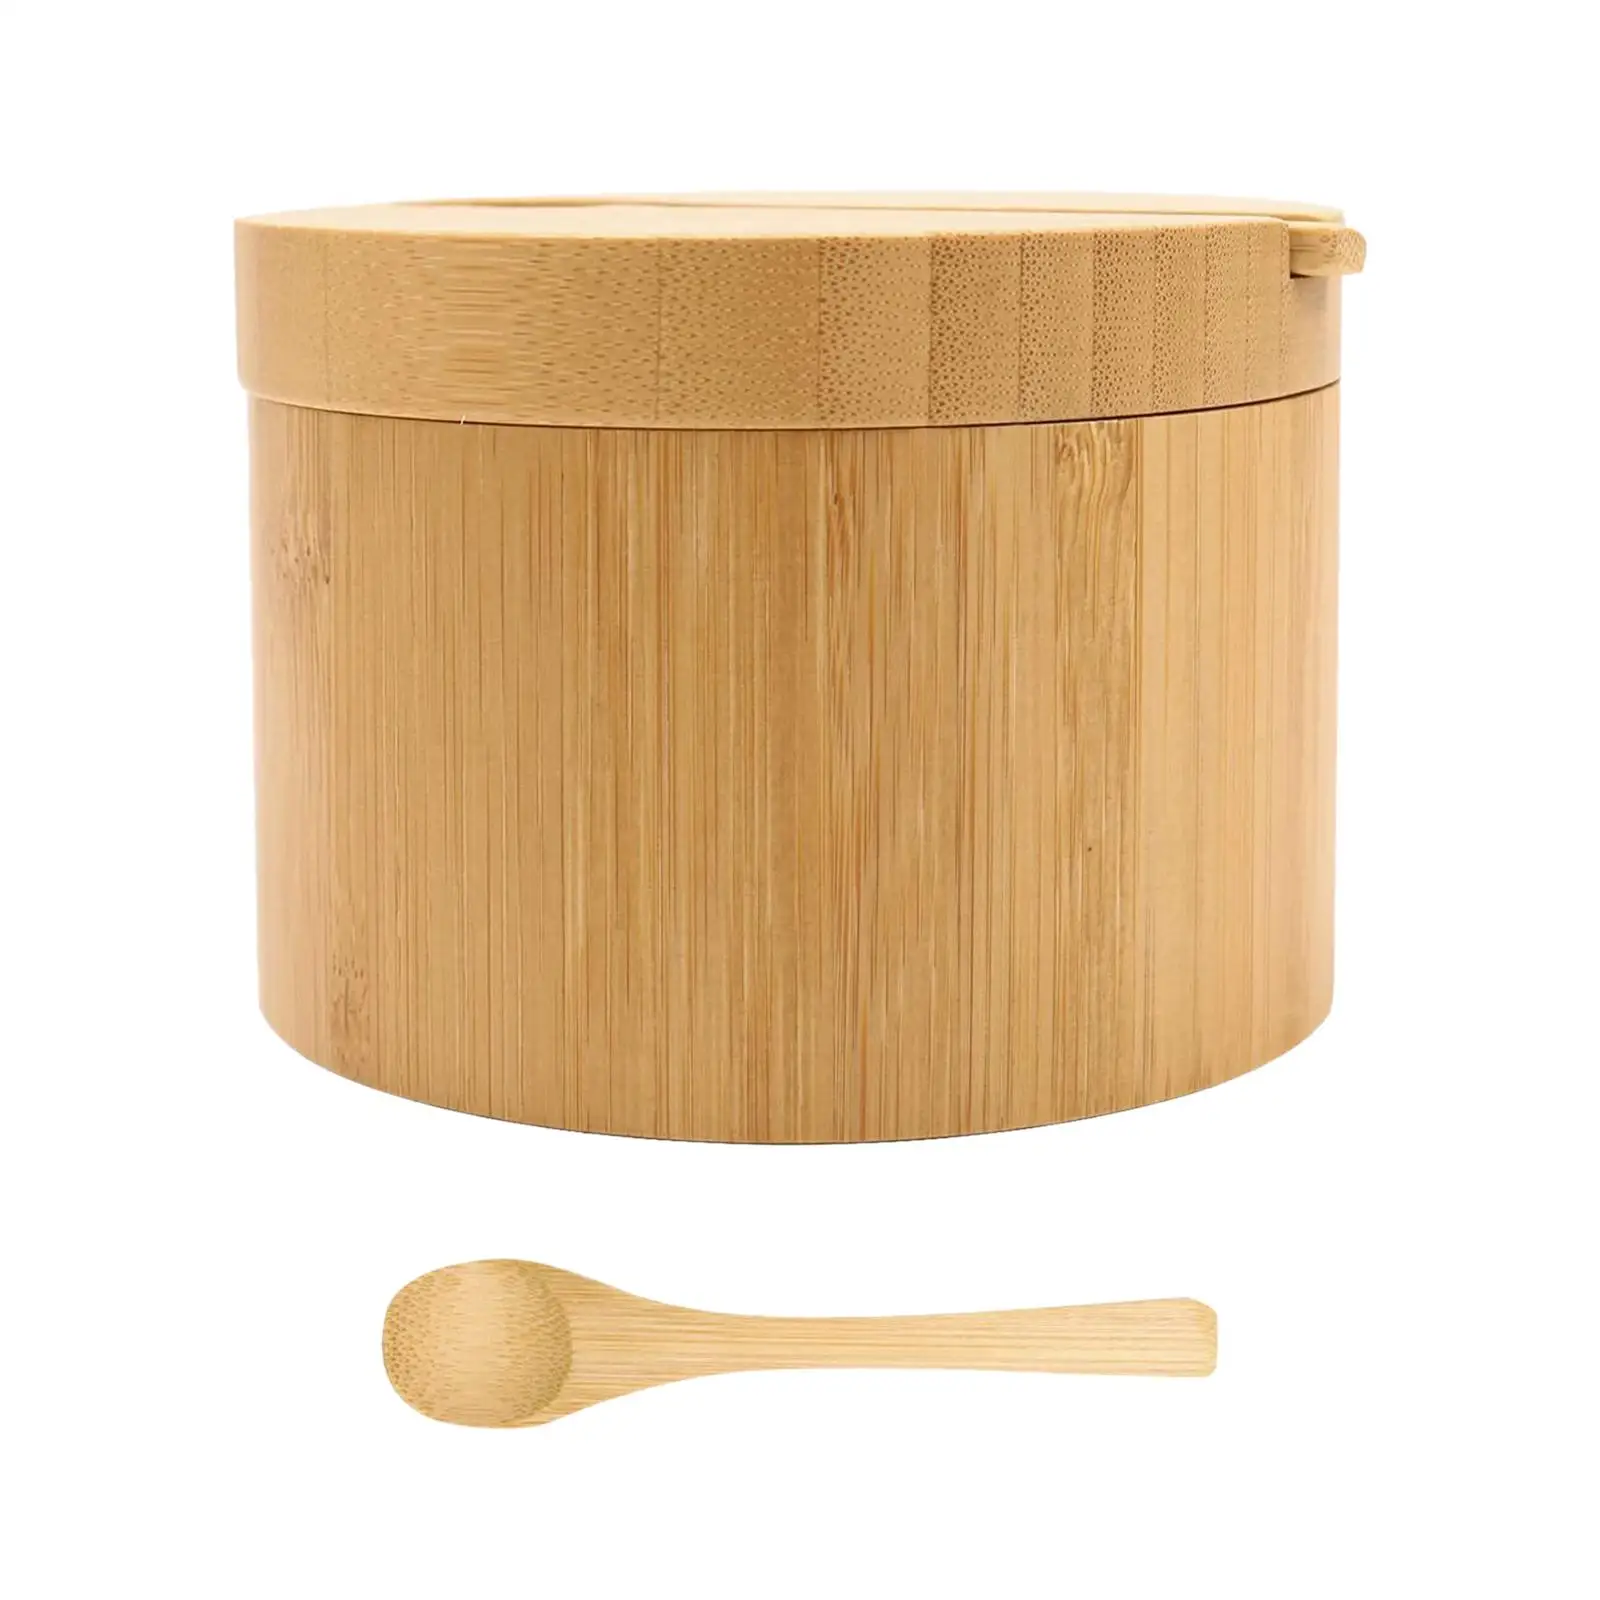 Wood Box for with Magnetic Lid and Spoon Cylinder Holder Desk Office Storage for Tea Salt Kitchen Countertop